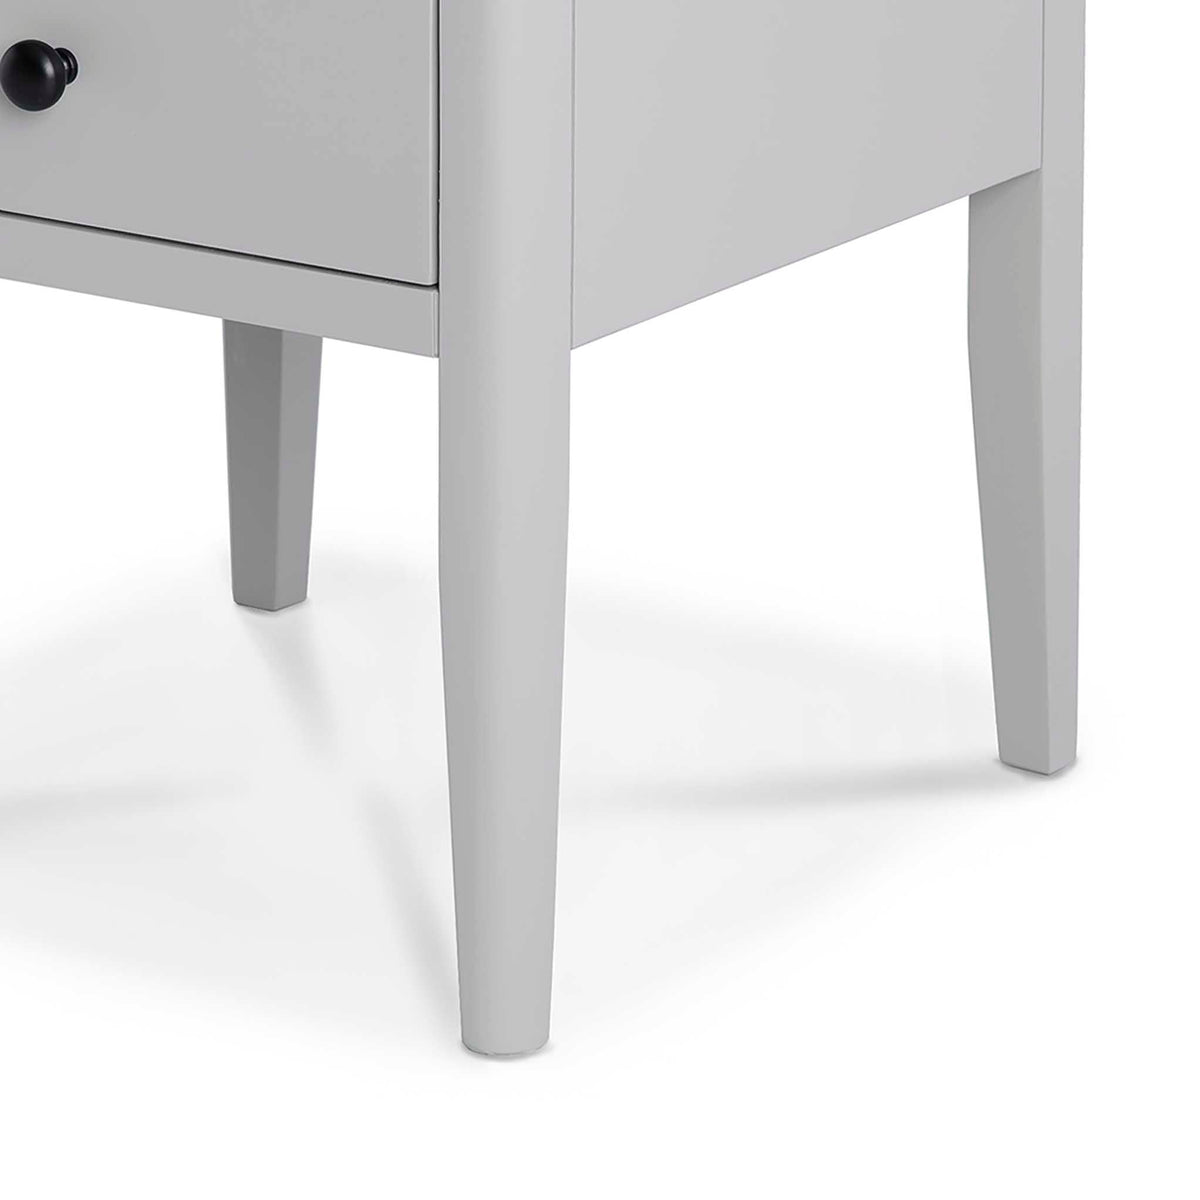 Elgin Grey Side Lamp Table - Close up of table legs